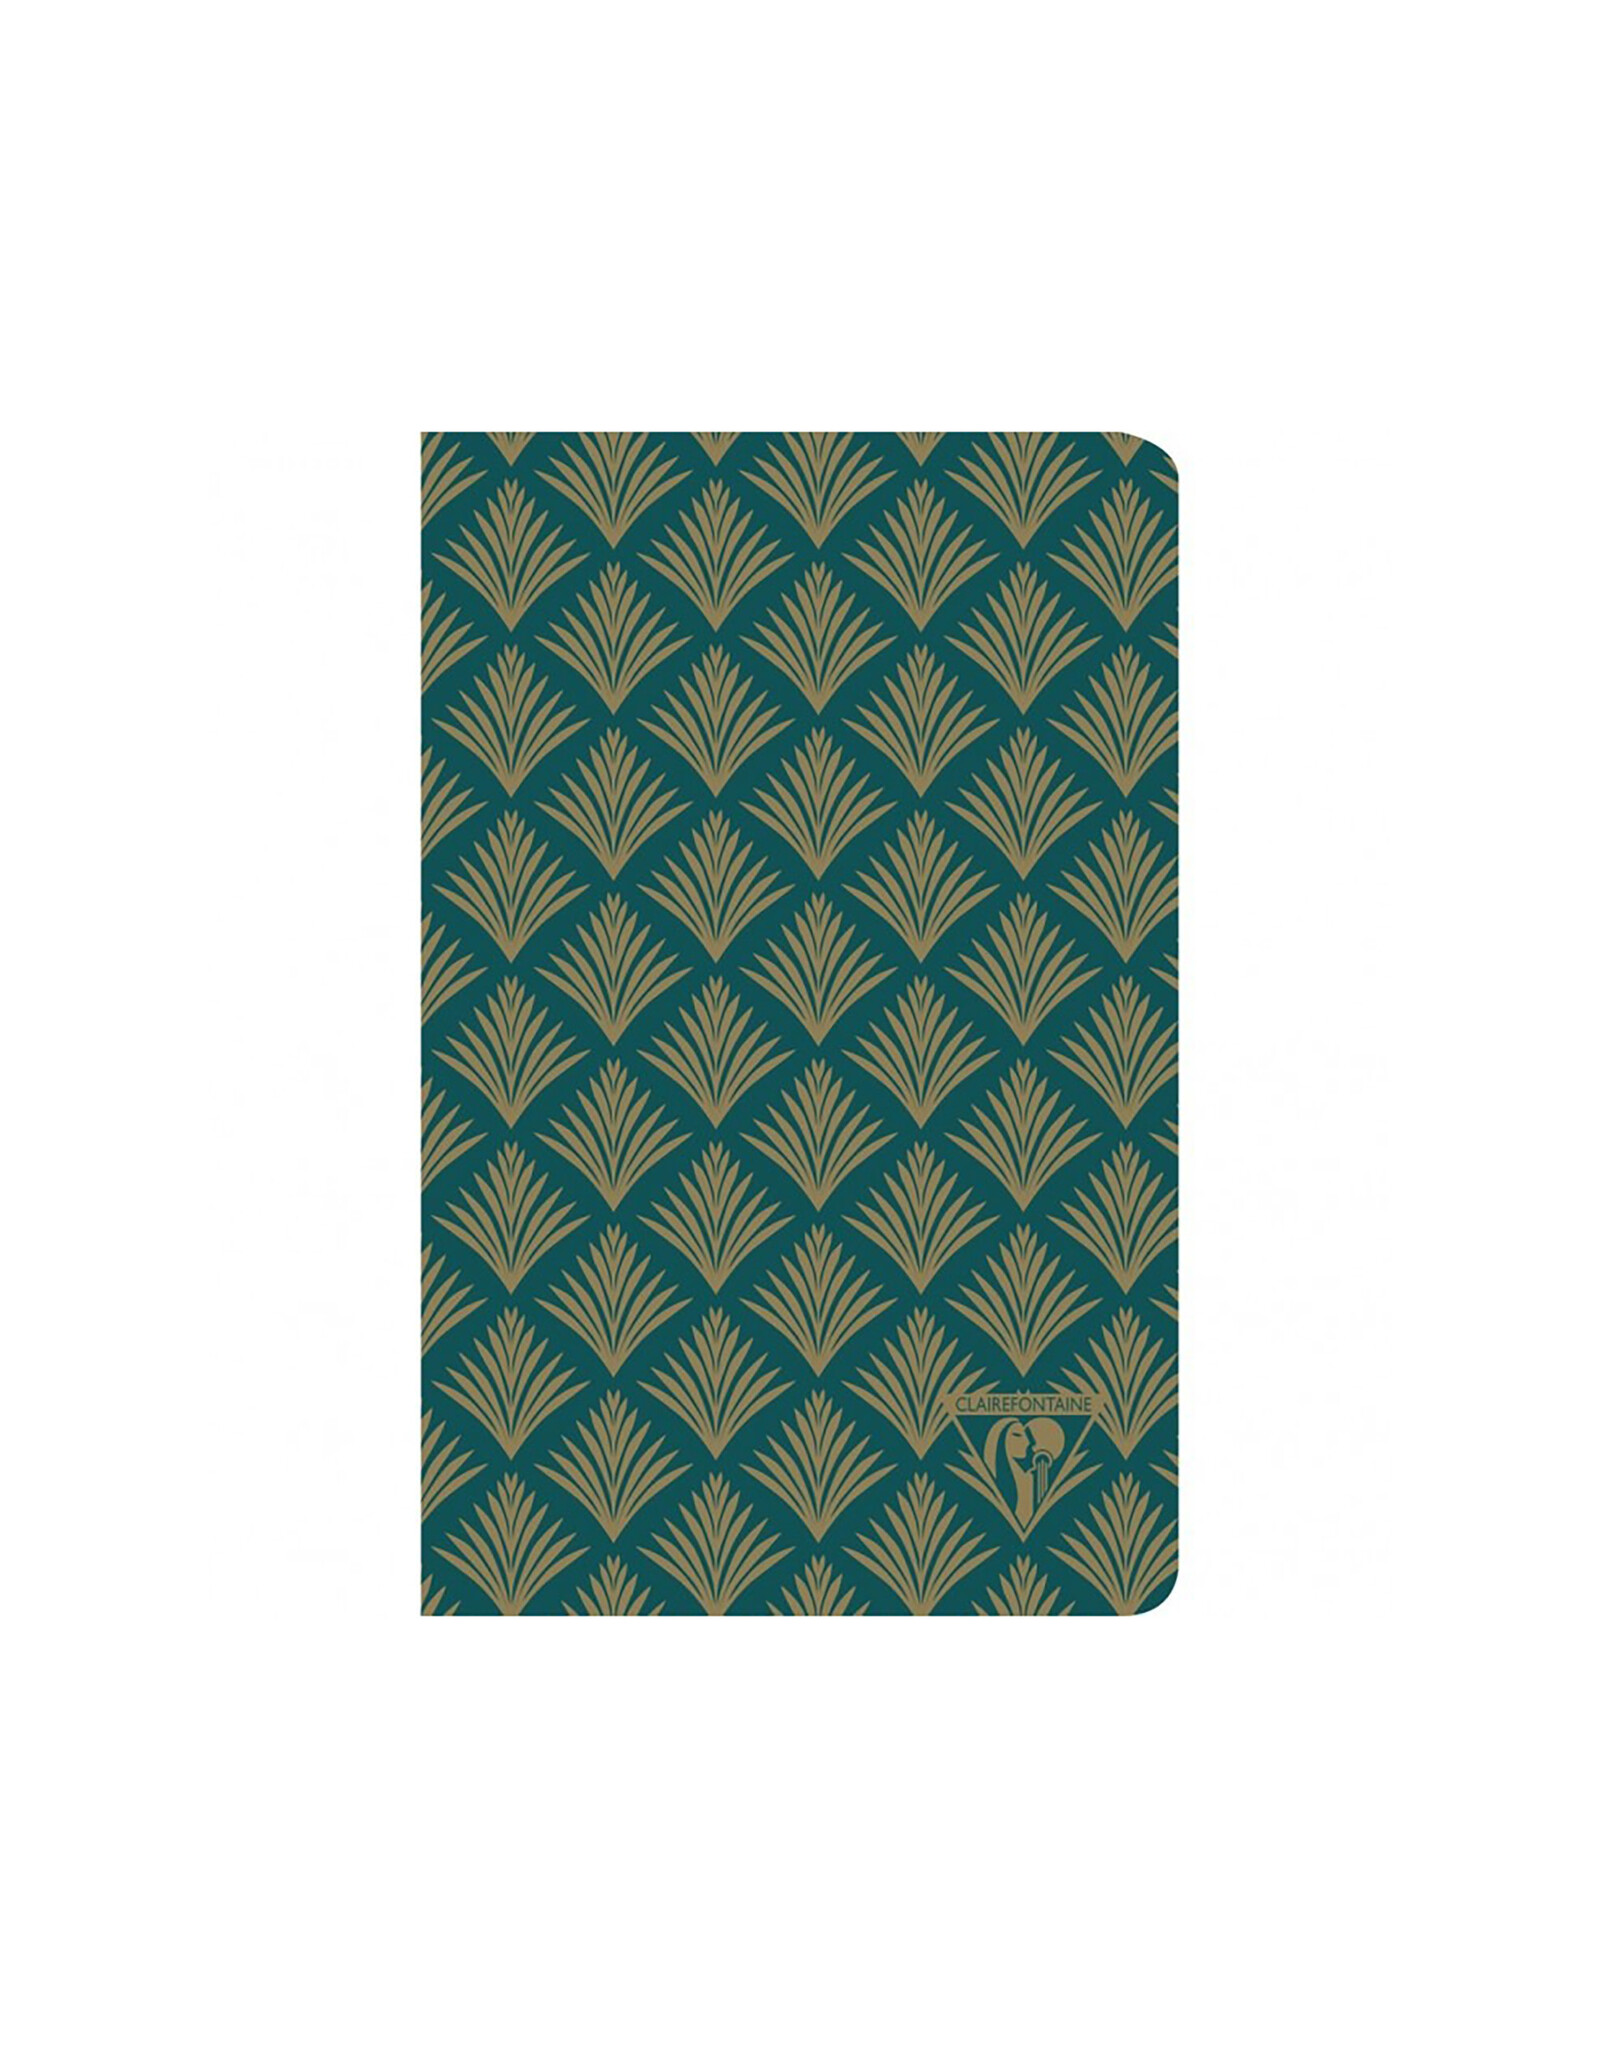 Clairefontaine Vegetal Pattern Turquoise Green Neo Deco Lined A5 Notebook